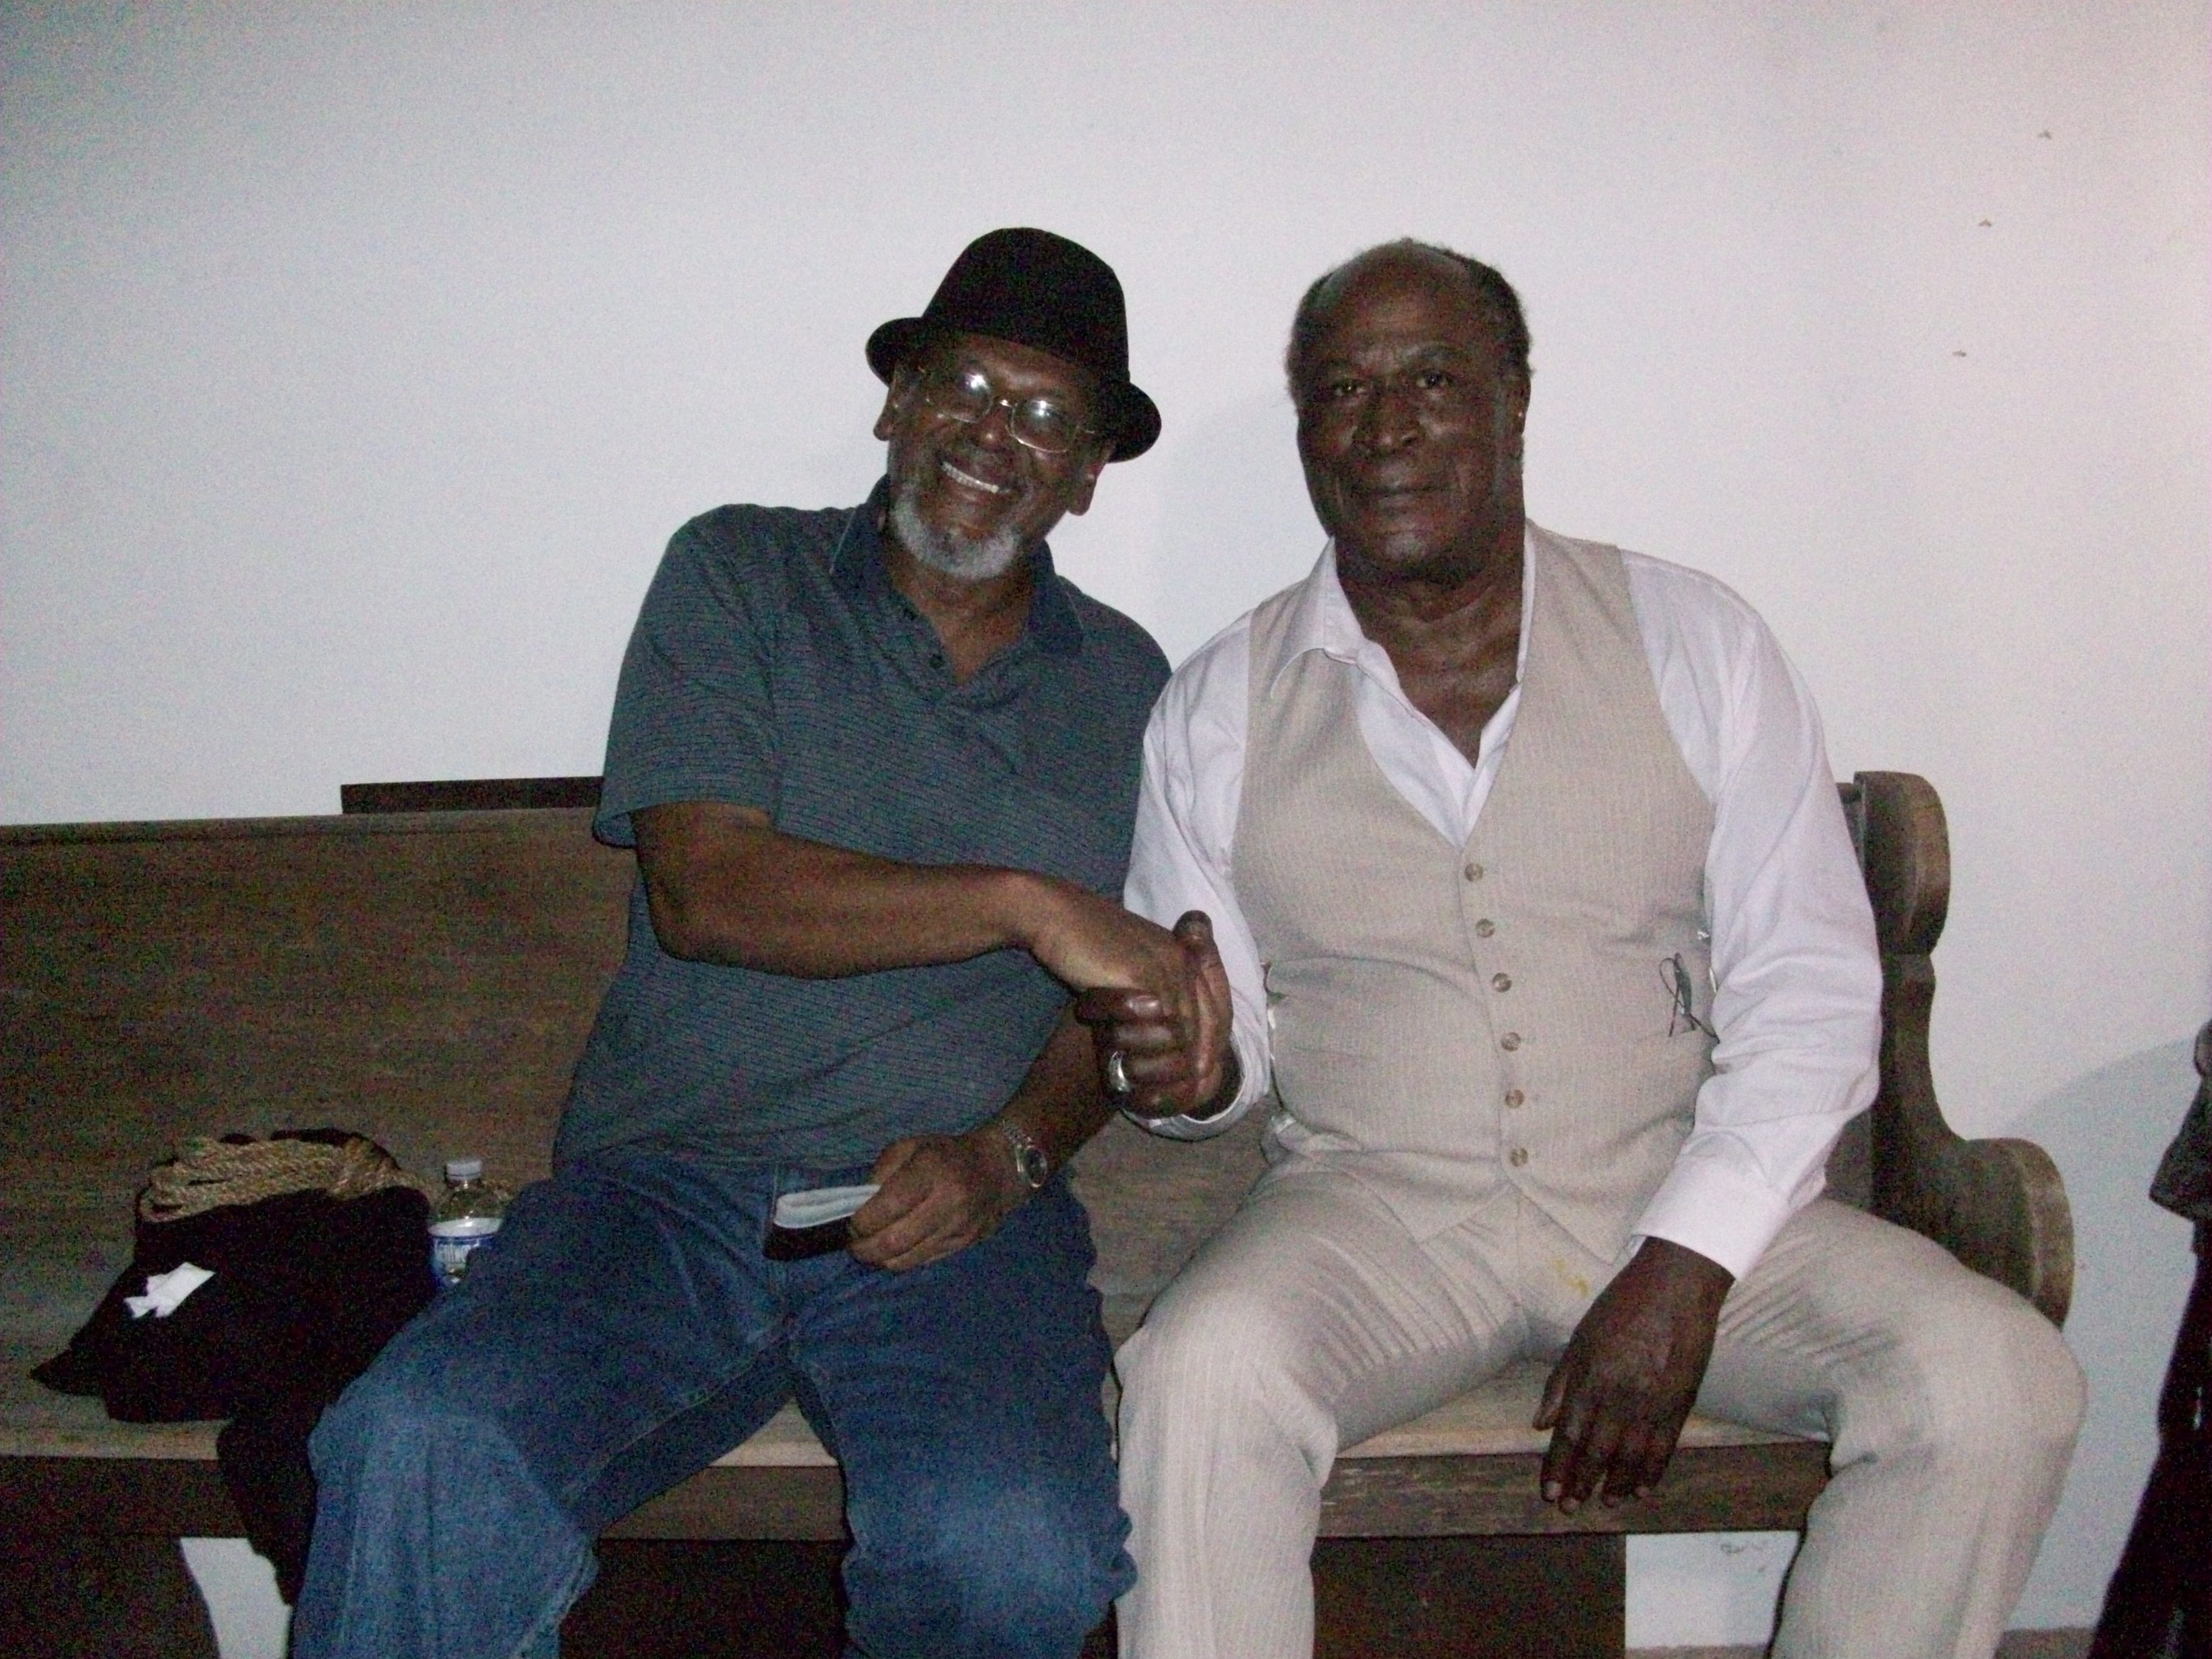 CHATTING WITH MY FRIEND JOHN AMOS